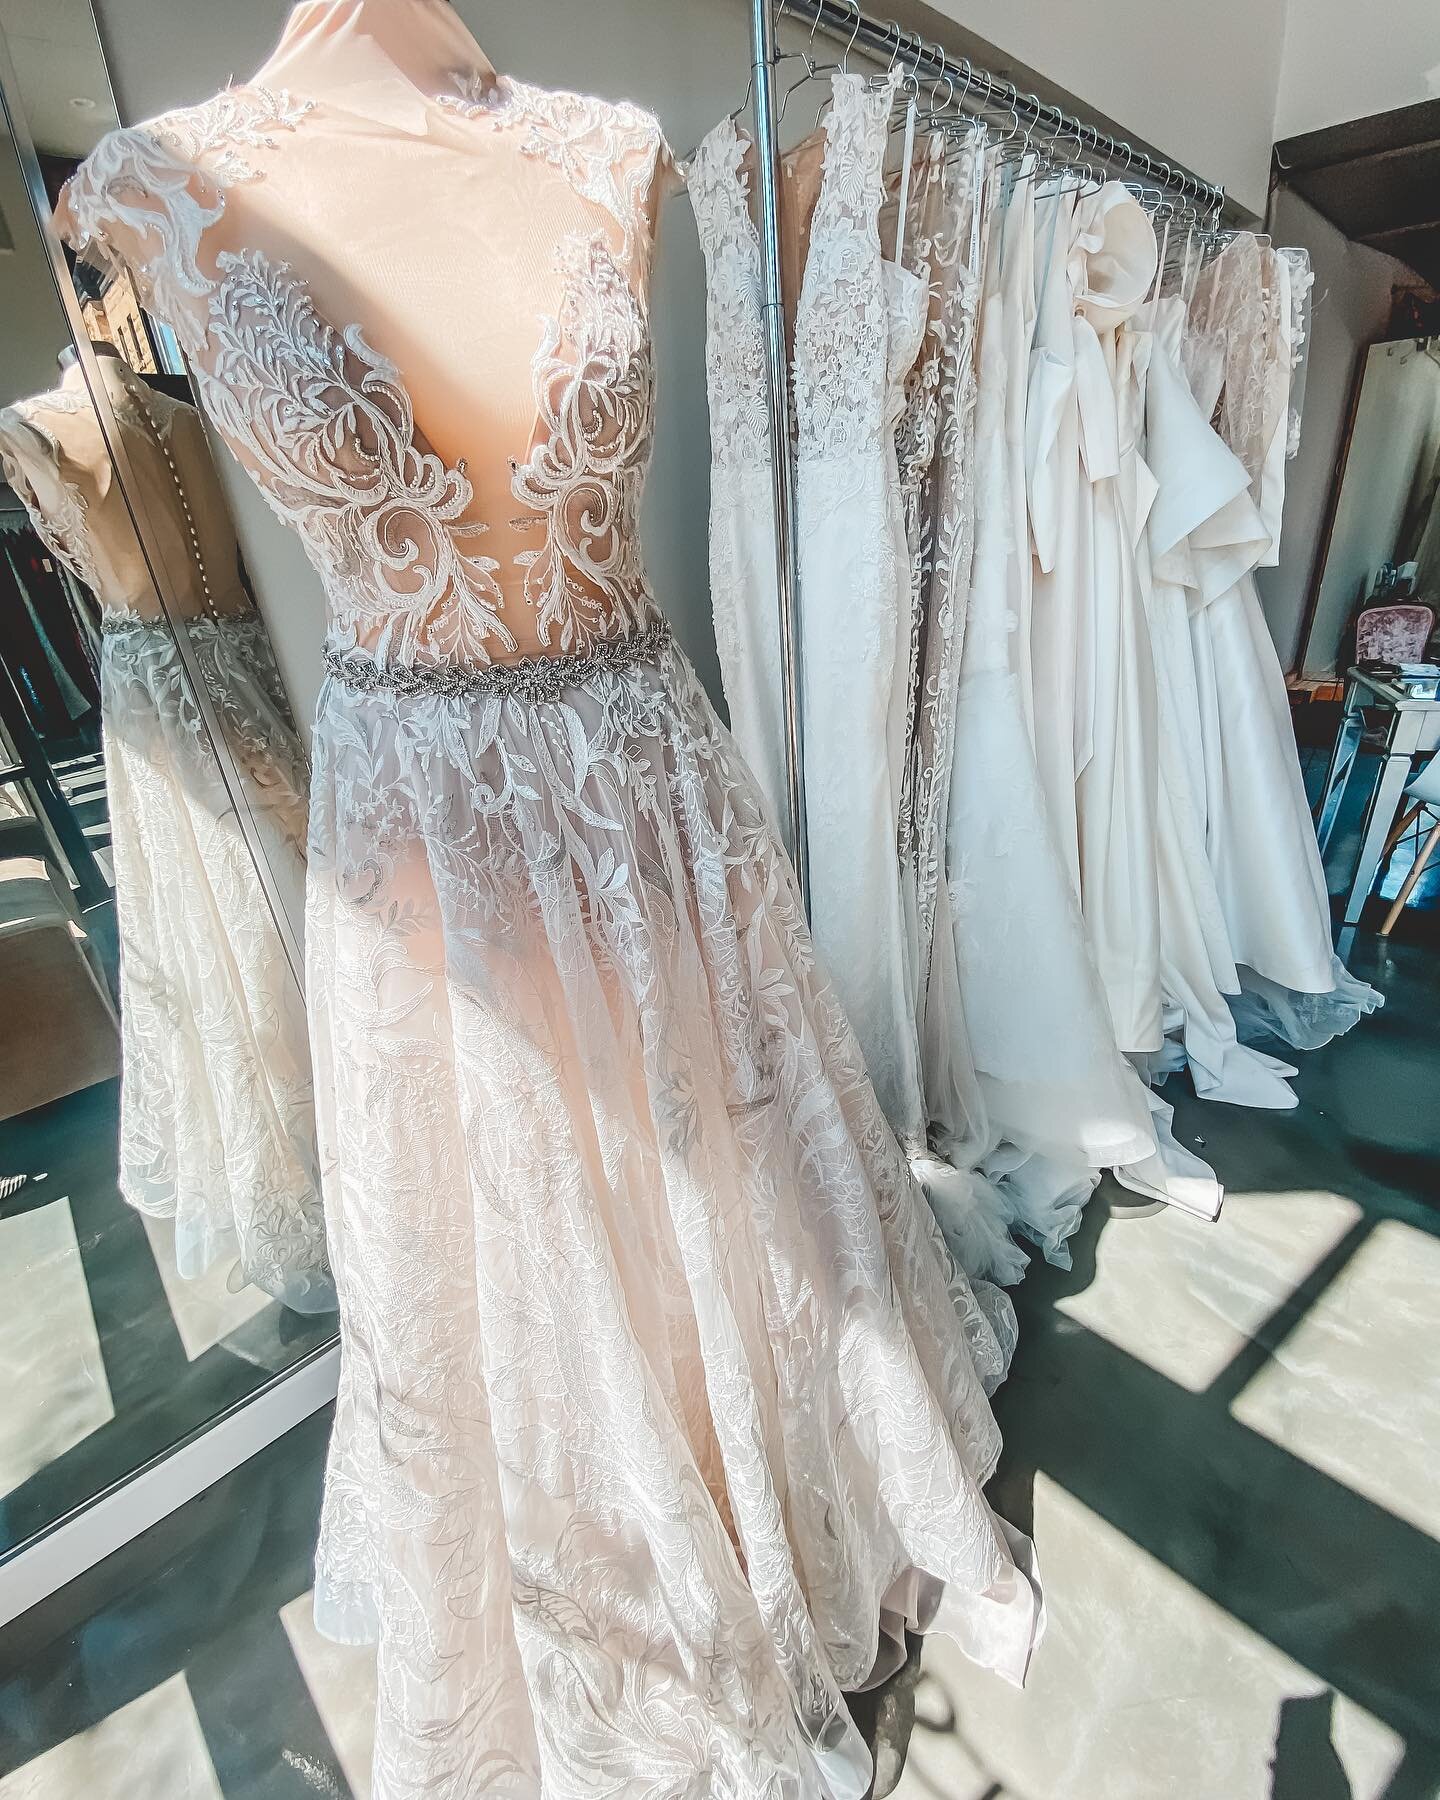 Come see what&rsquo;s new from @berta @peterlangner &amp; more! Up to 30% continues through the end of Summer ☀️
.
.
.
#secondcitybride #chicagobride #chicagowedding #2022wedding #2023wedding #offtherack #microwedding #weddinginspiration #designersam